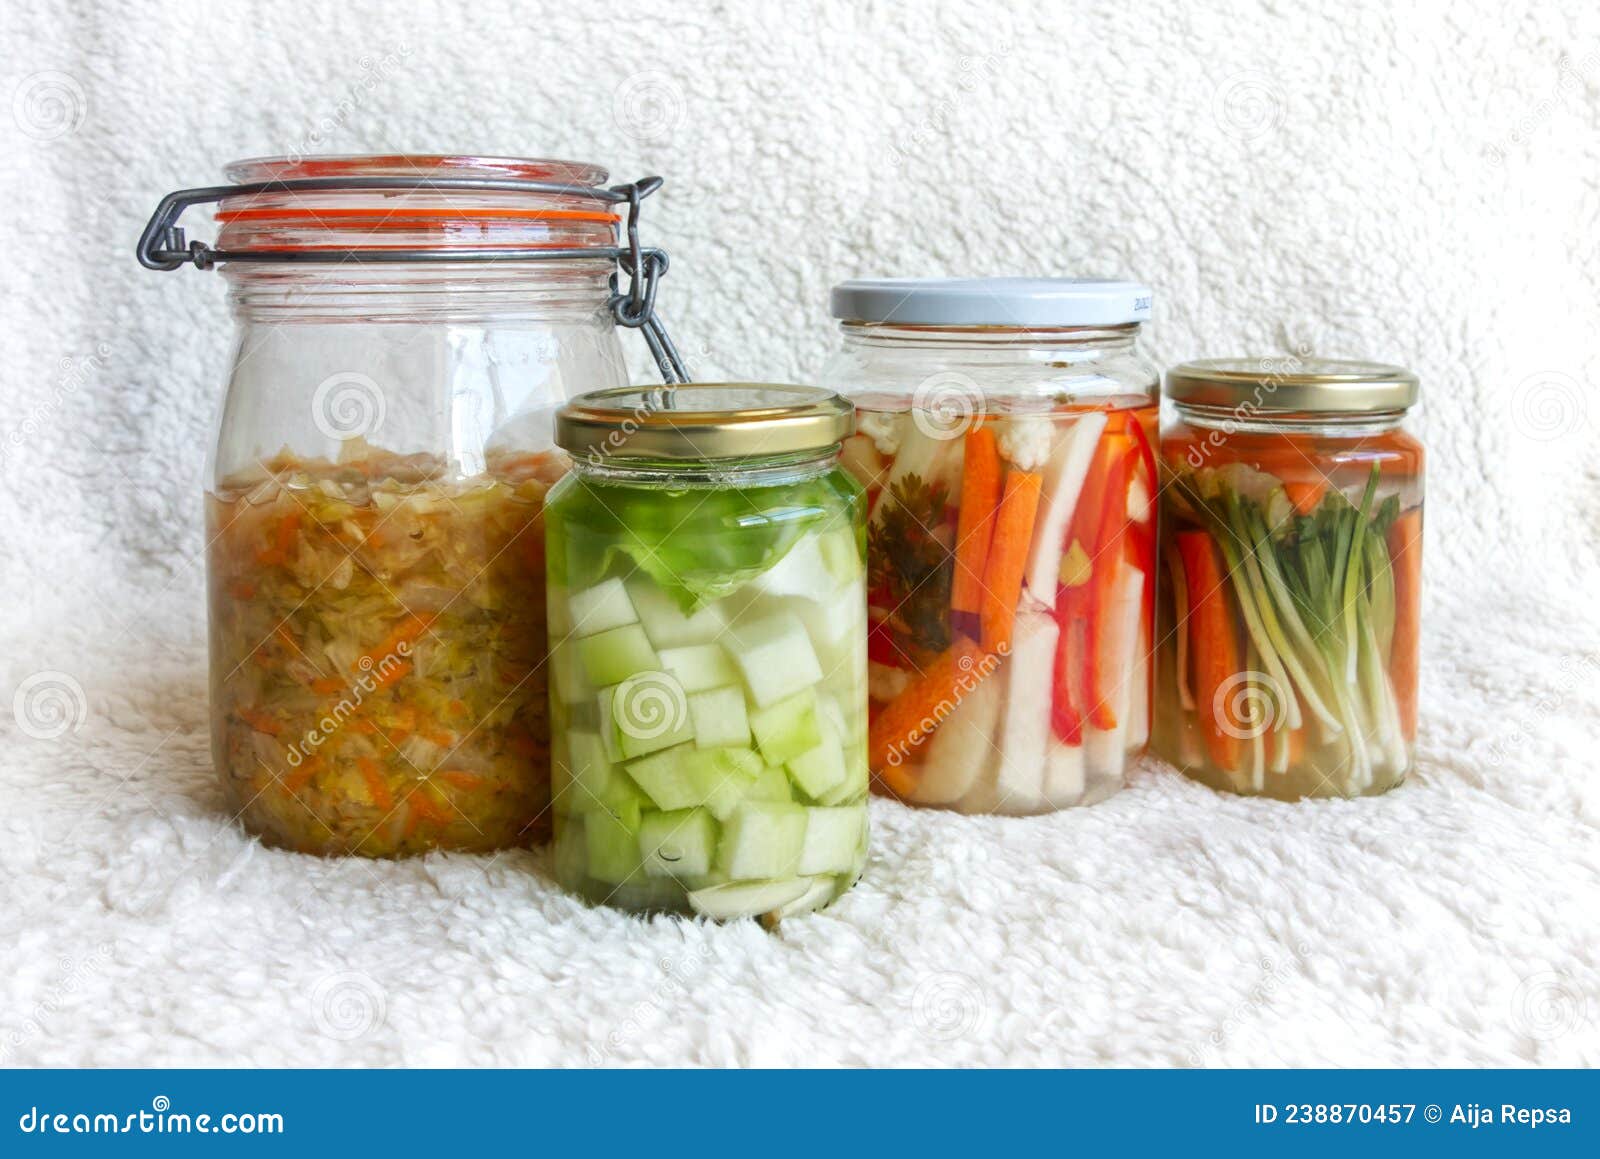 probiotic home made lacto-fermented vegetables in jars